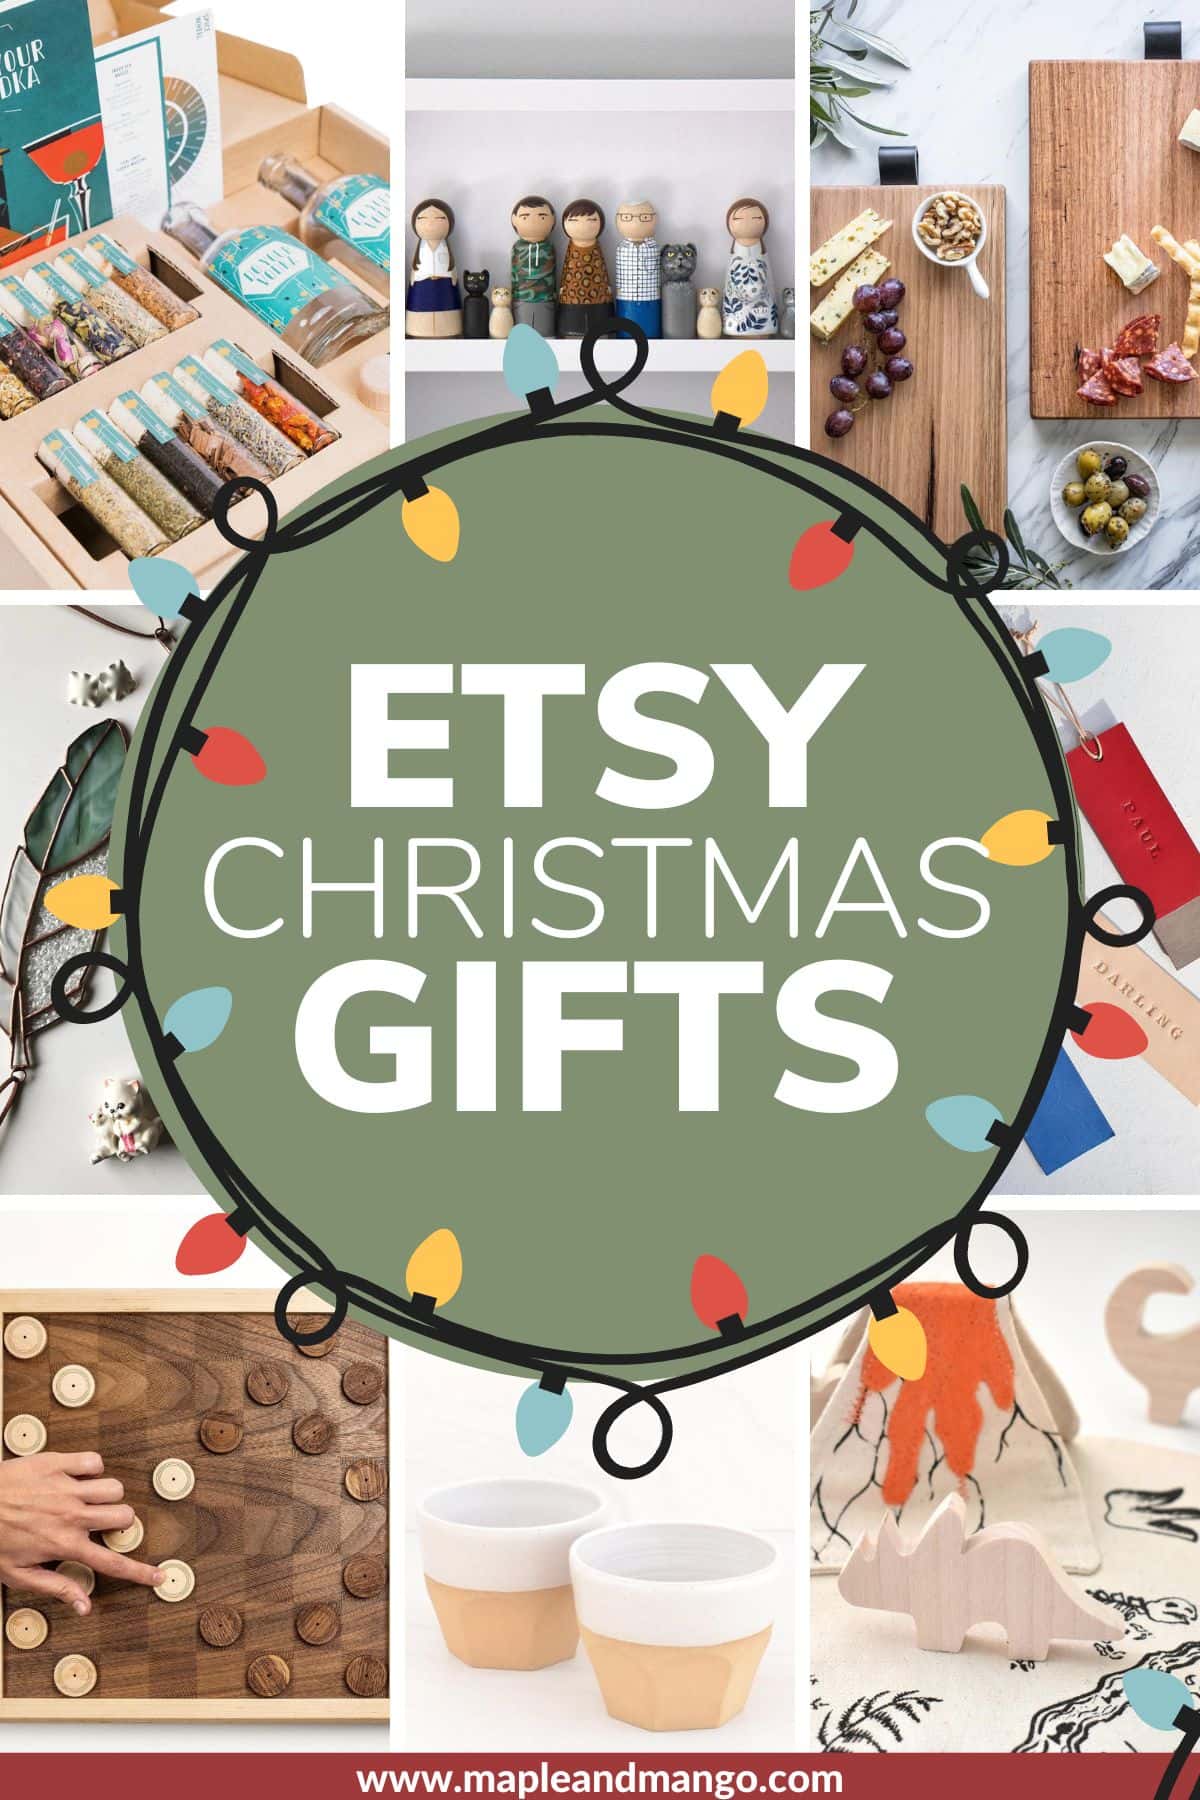 Collage of gift ideas found on Etsy with text overlay that reads "Etsy Christmas Gifts".